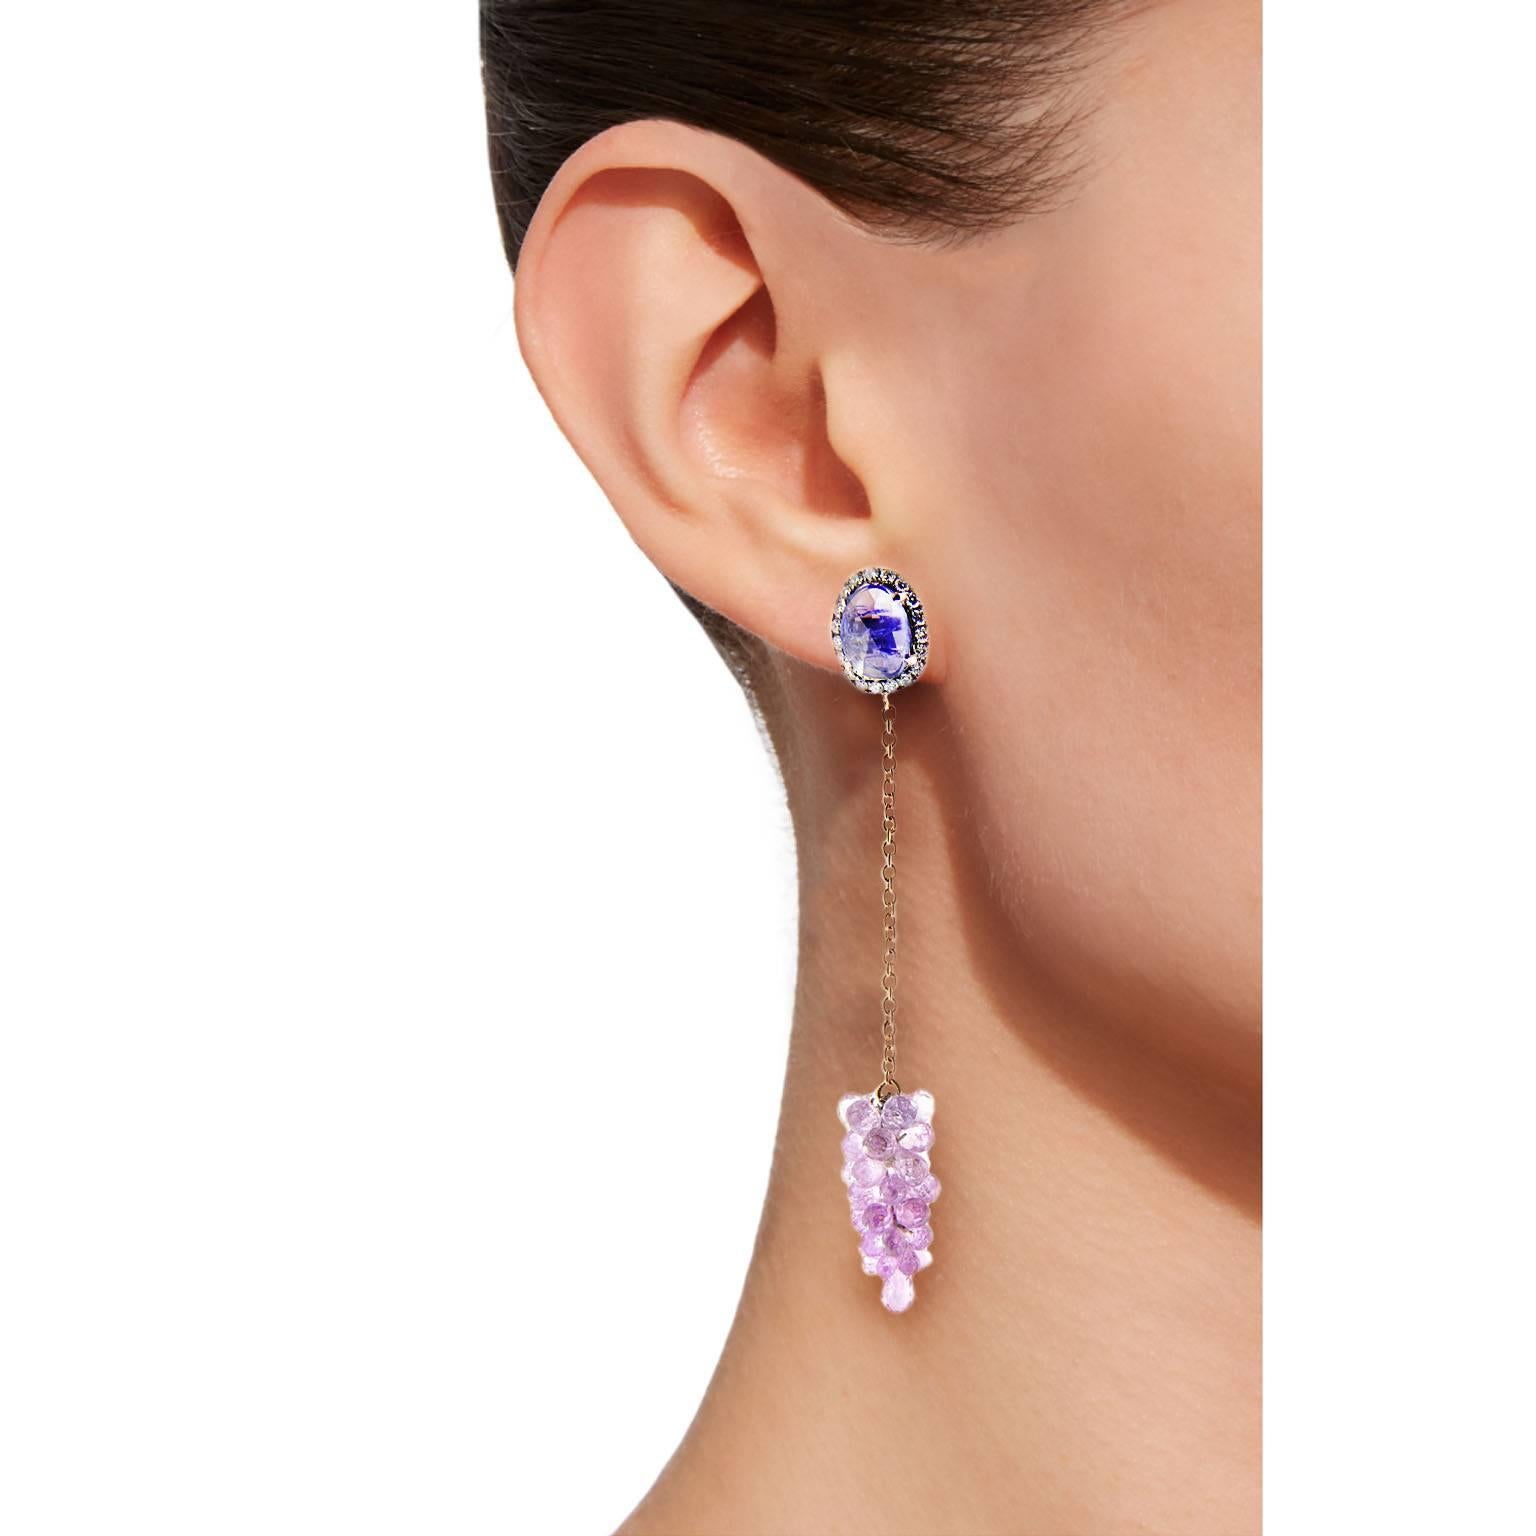 Jona design collection, hand crafted in Italy, beautiful cluster of natural pink briolette cut drops weighing 25.1 carats, suspending from two crazy cut tanzanites, weighing 3.45 carats in total,  surrounded by 0.49 carats of white diamonds, mounted